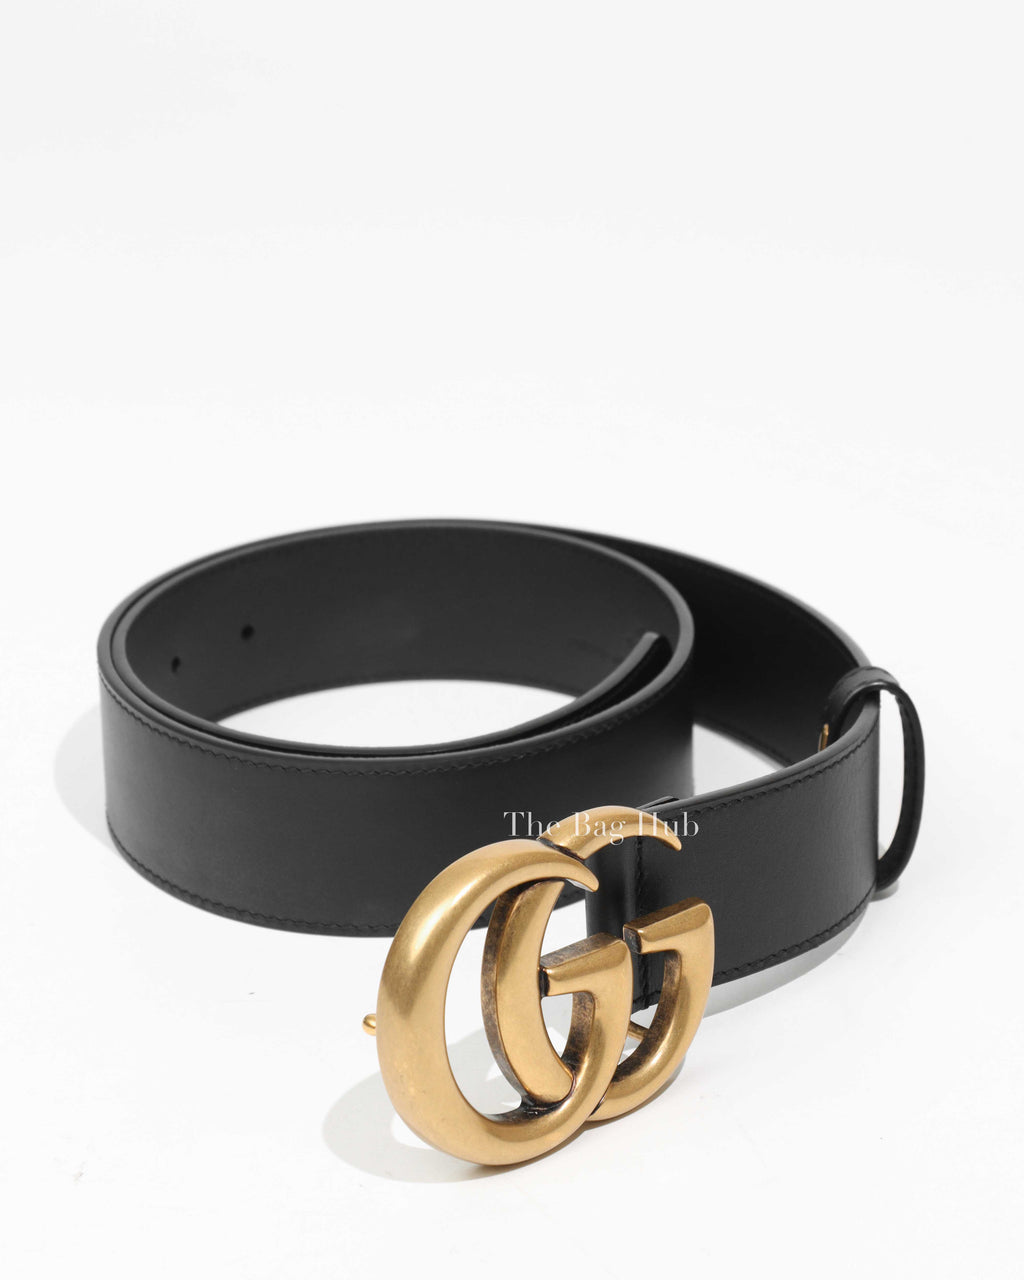 Gucci Black Leather GG Marmont Leather Belt Size 80/32-1